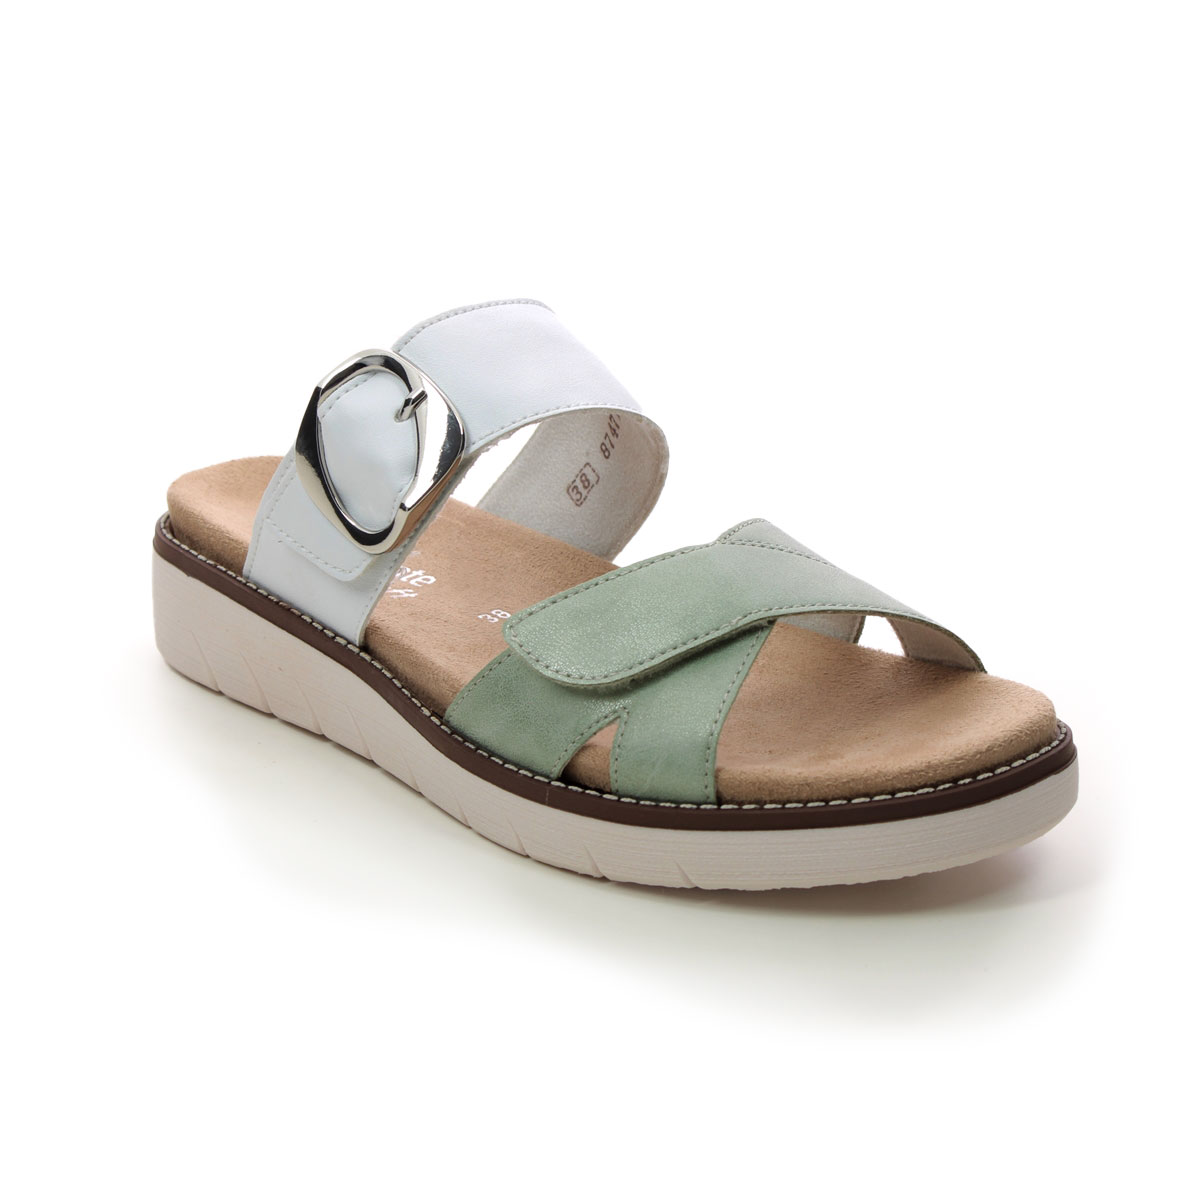 Remonte D2048-52 Marislide White Mint Womens Slide Sandals in a Plain Man-made in Size 38